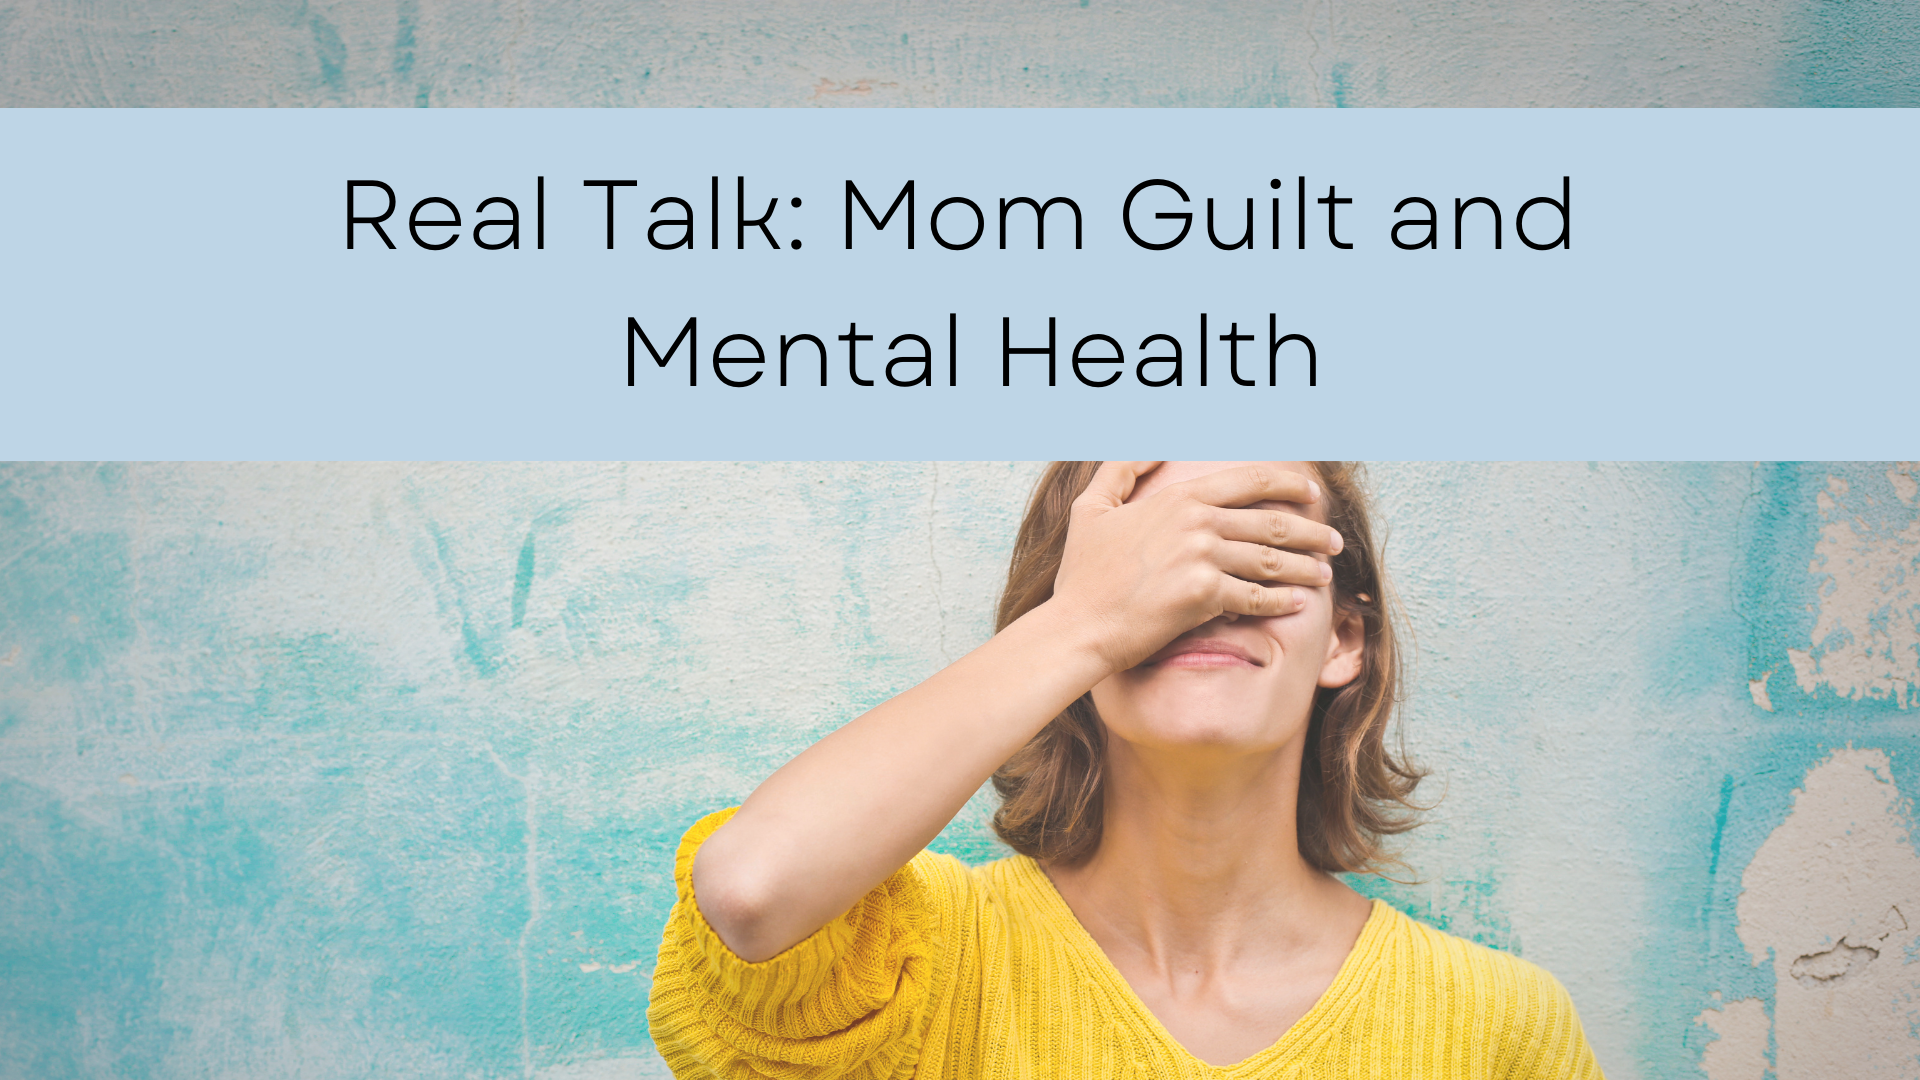 Real Talk: Mom Guilt and Mental Health